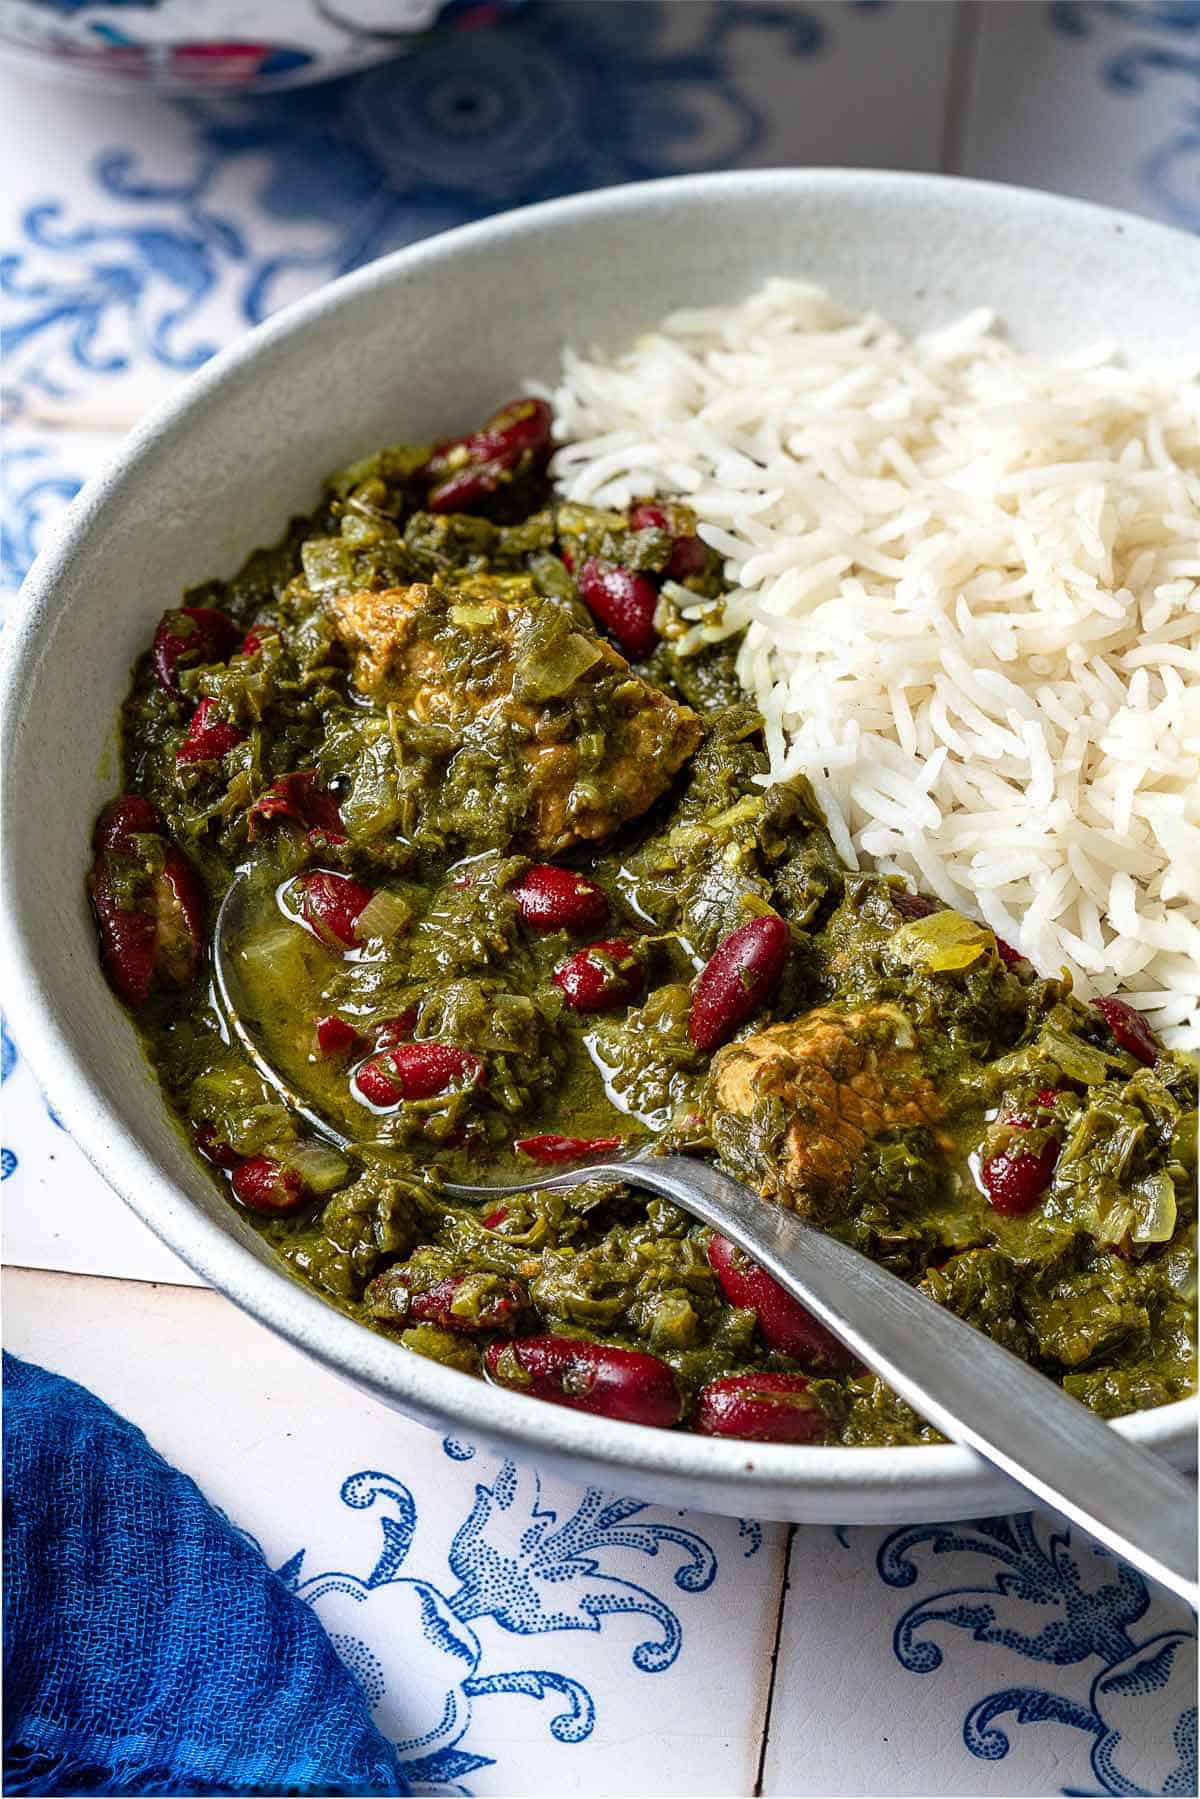 Ghormeh sabzi in a bowl with rice and a spoon.